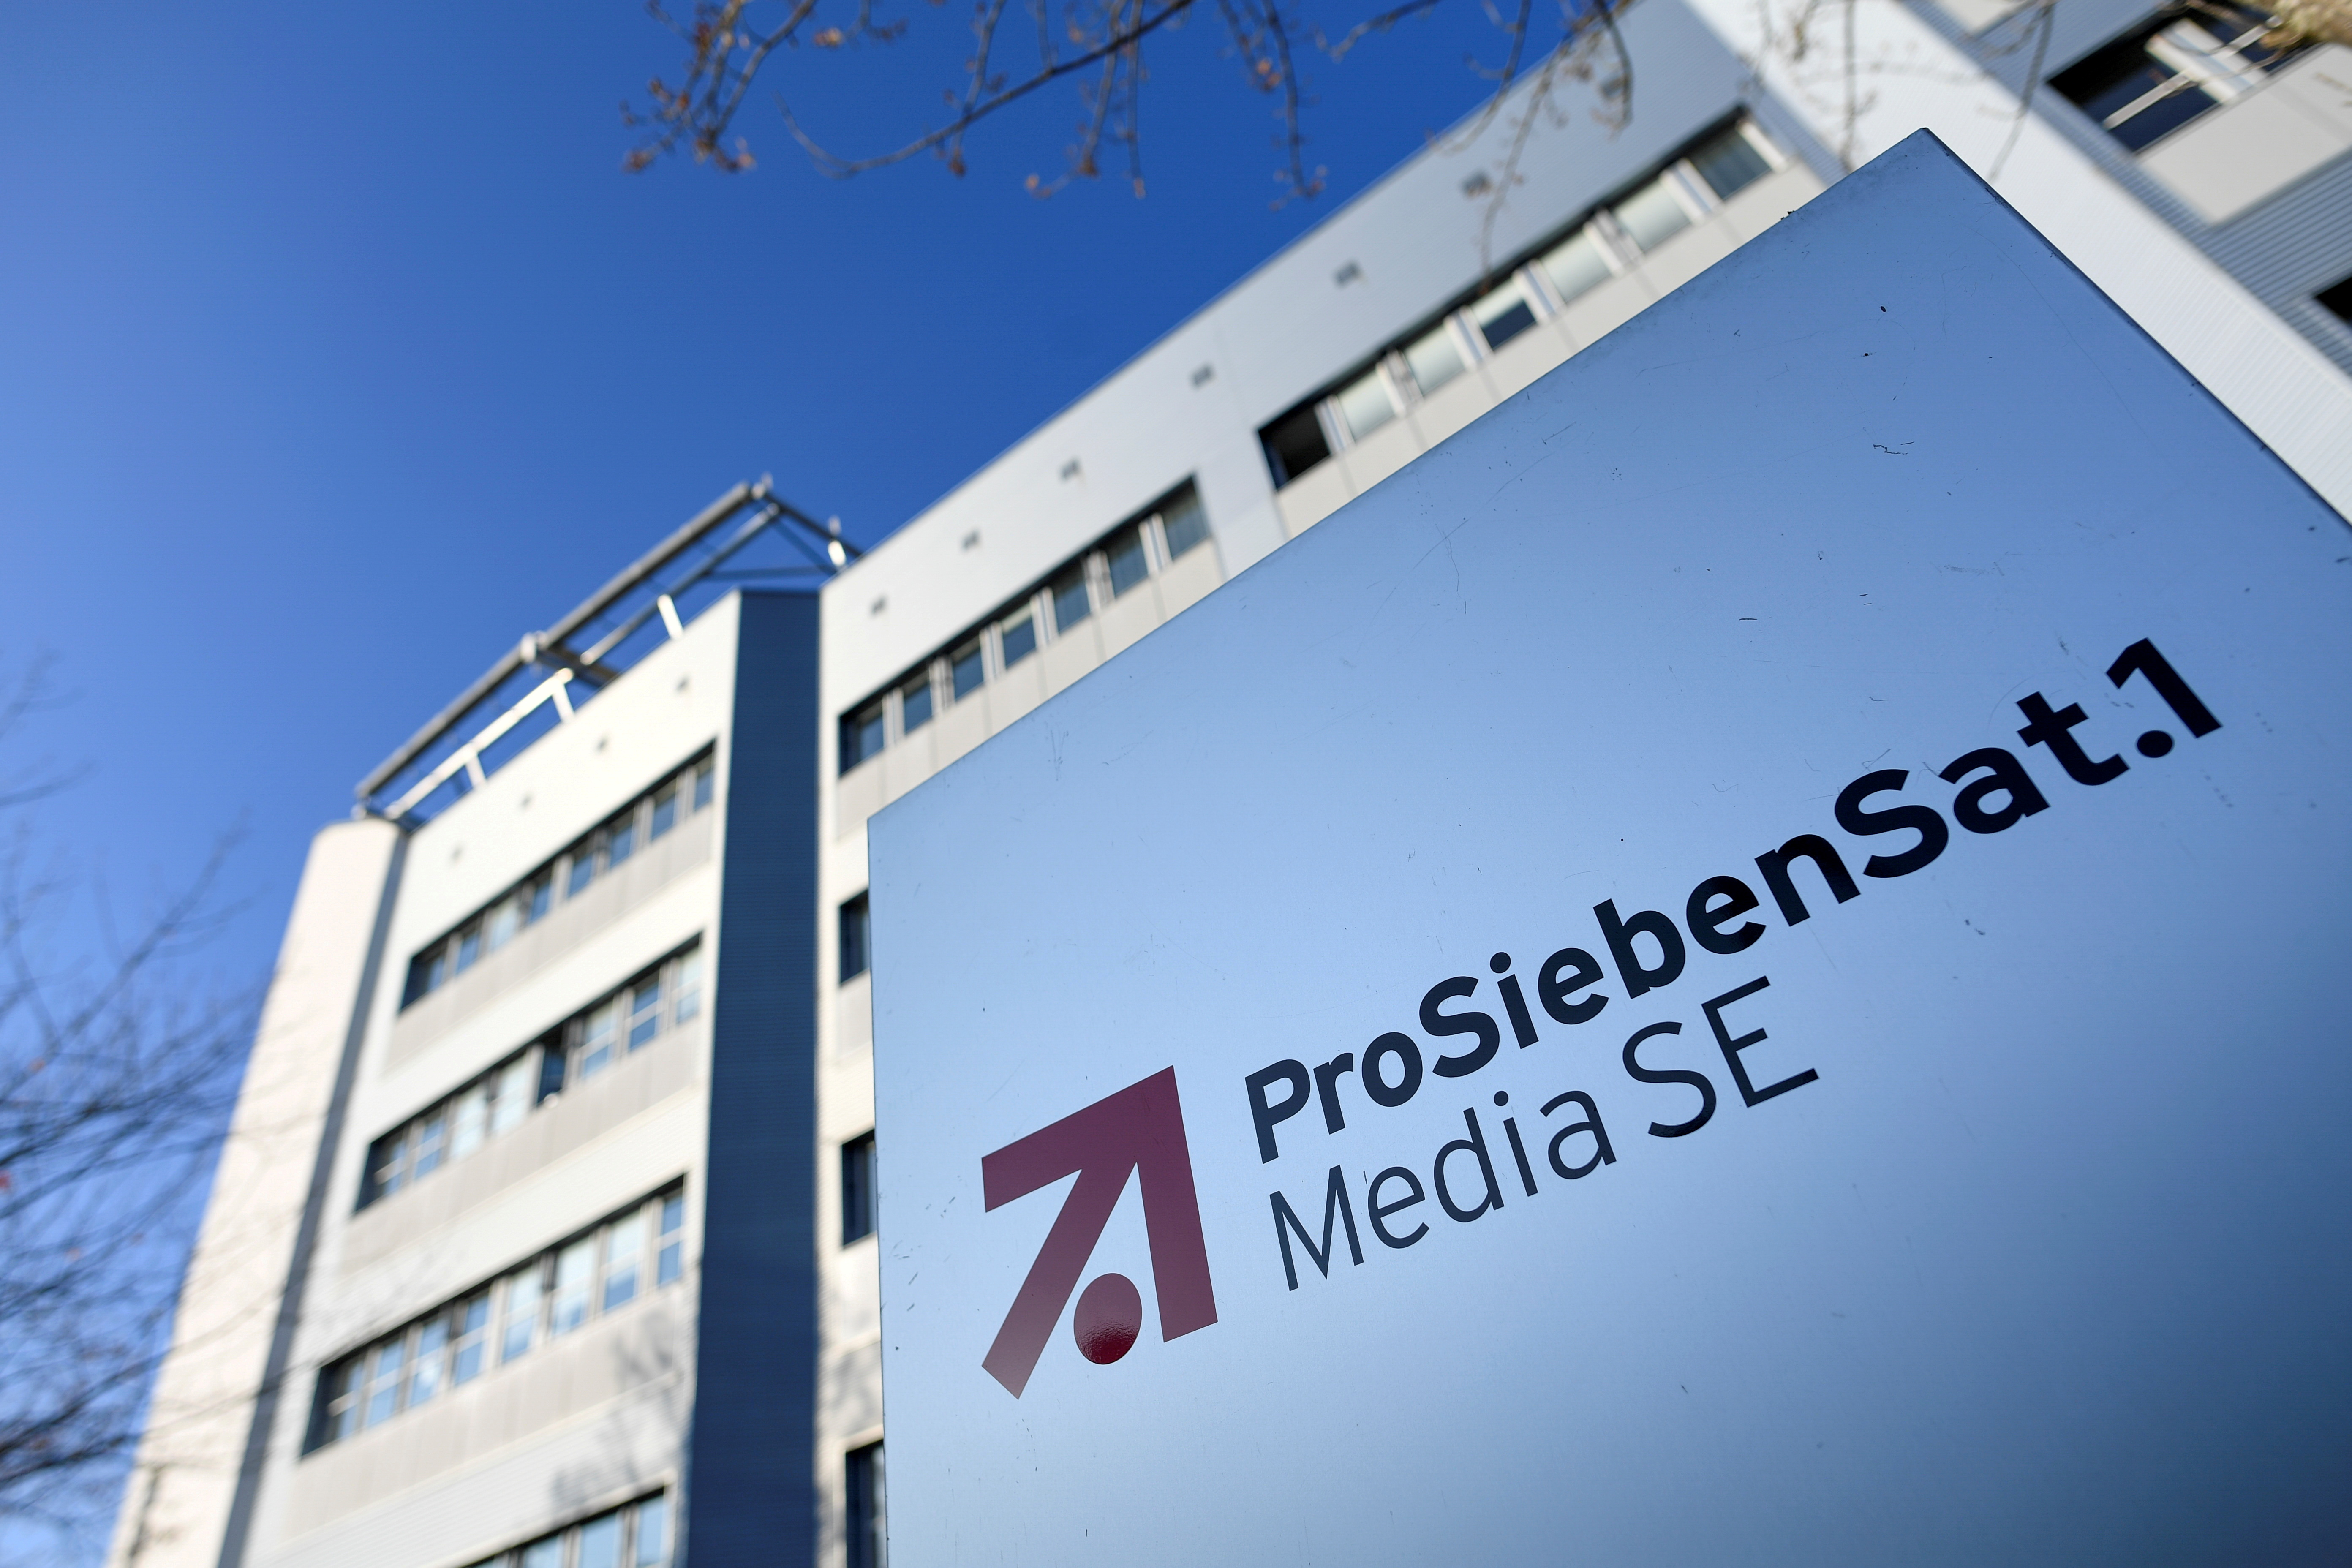 FILE PHOTO: The logo of German media company ProSiebenSat.1 in front of its headquarters in Unterfoehring